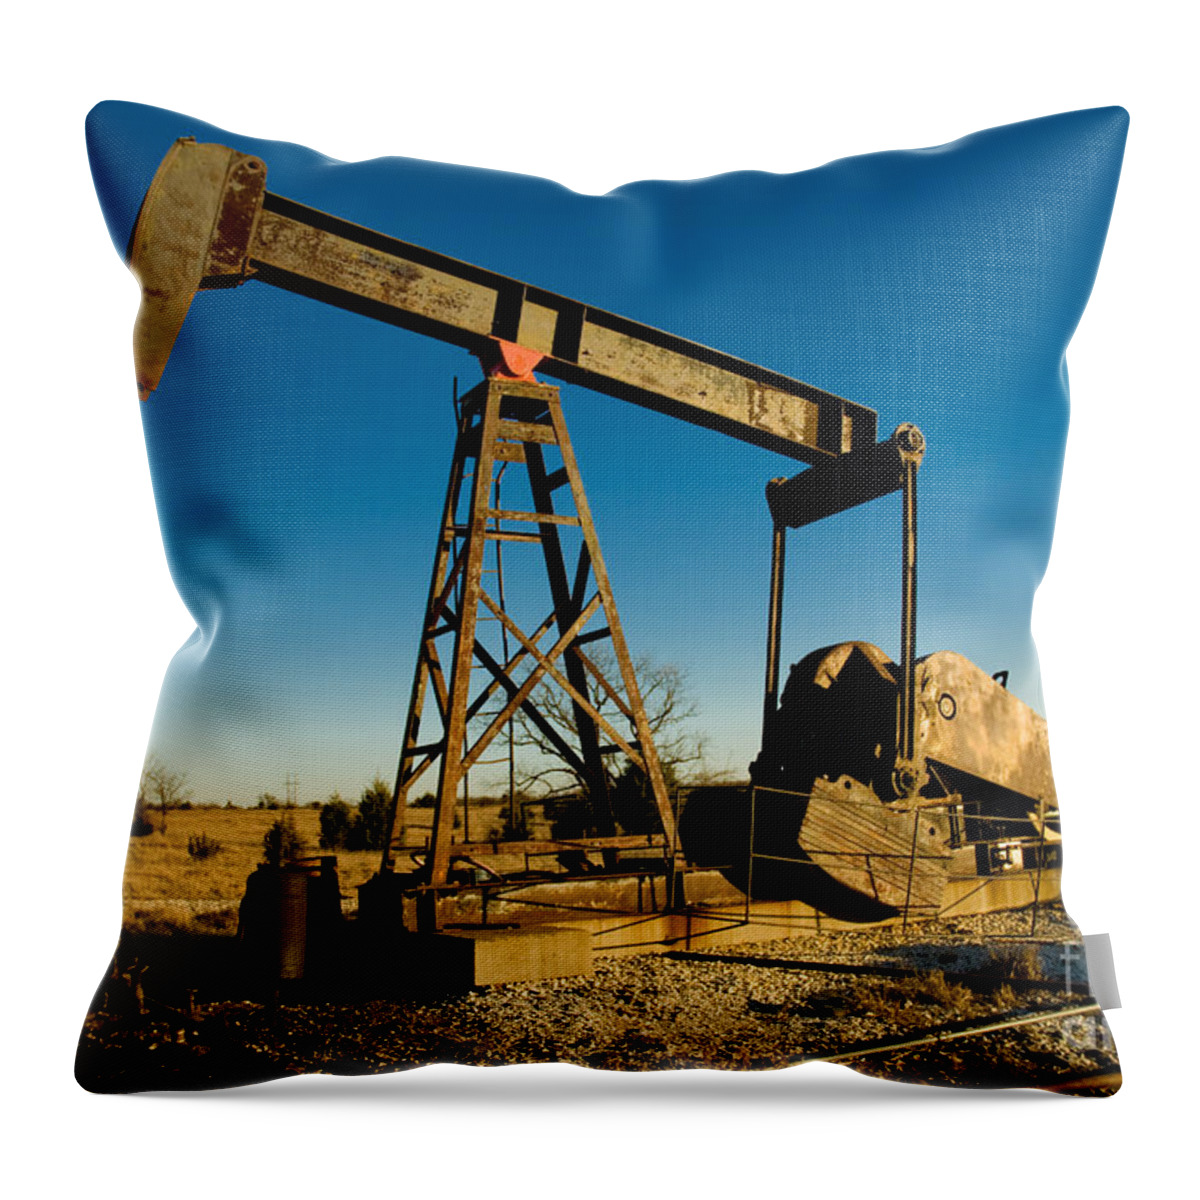 Crude Oil Throw Pillow featuring the photograph Oil Rig by Anthony Totah